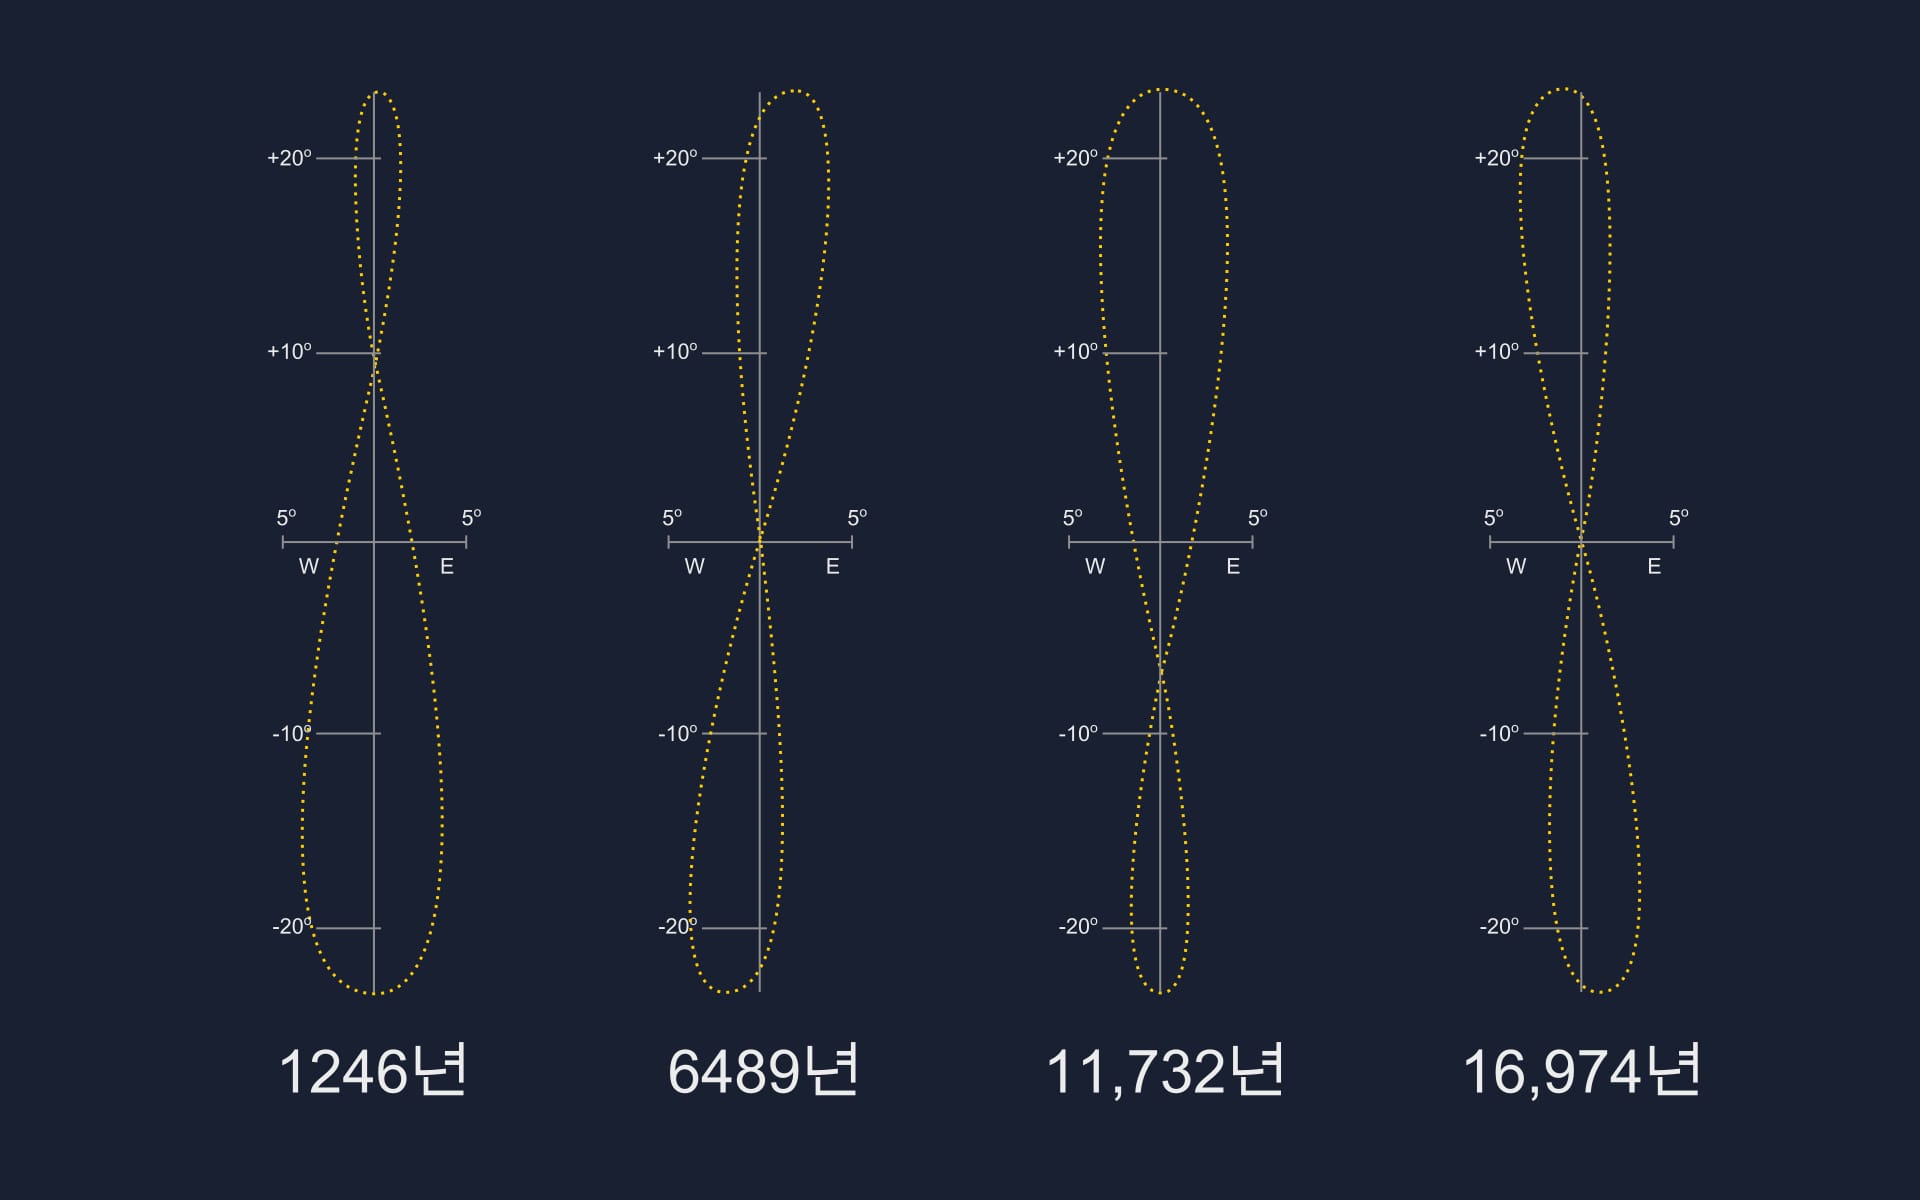 Analemma of different years